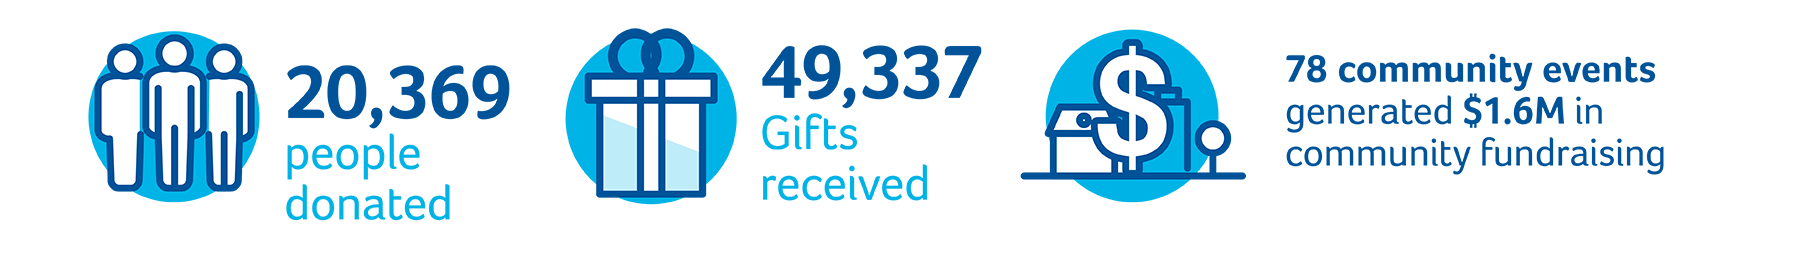 20,369 People donated. 49,337 gifts received, 78 Community events generated $1.6M in community fundraising.